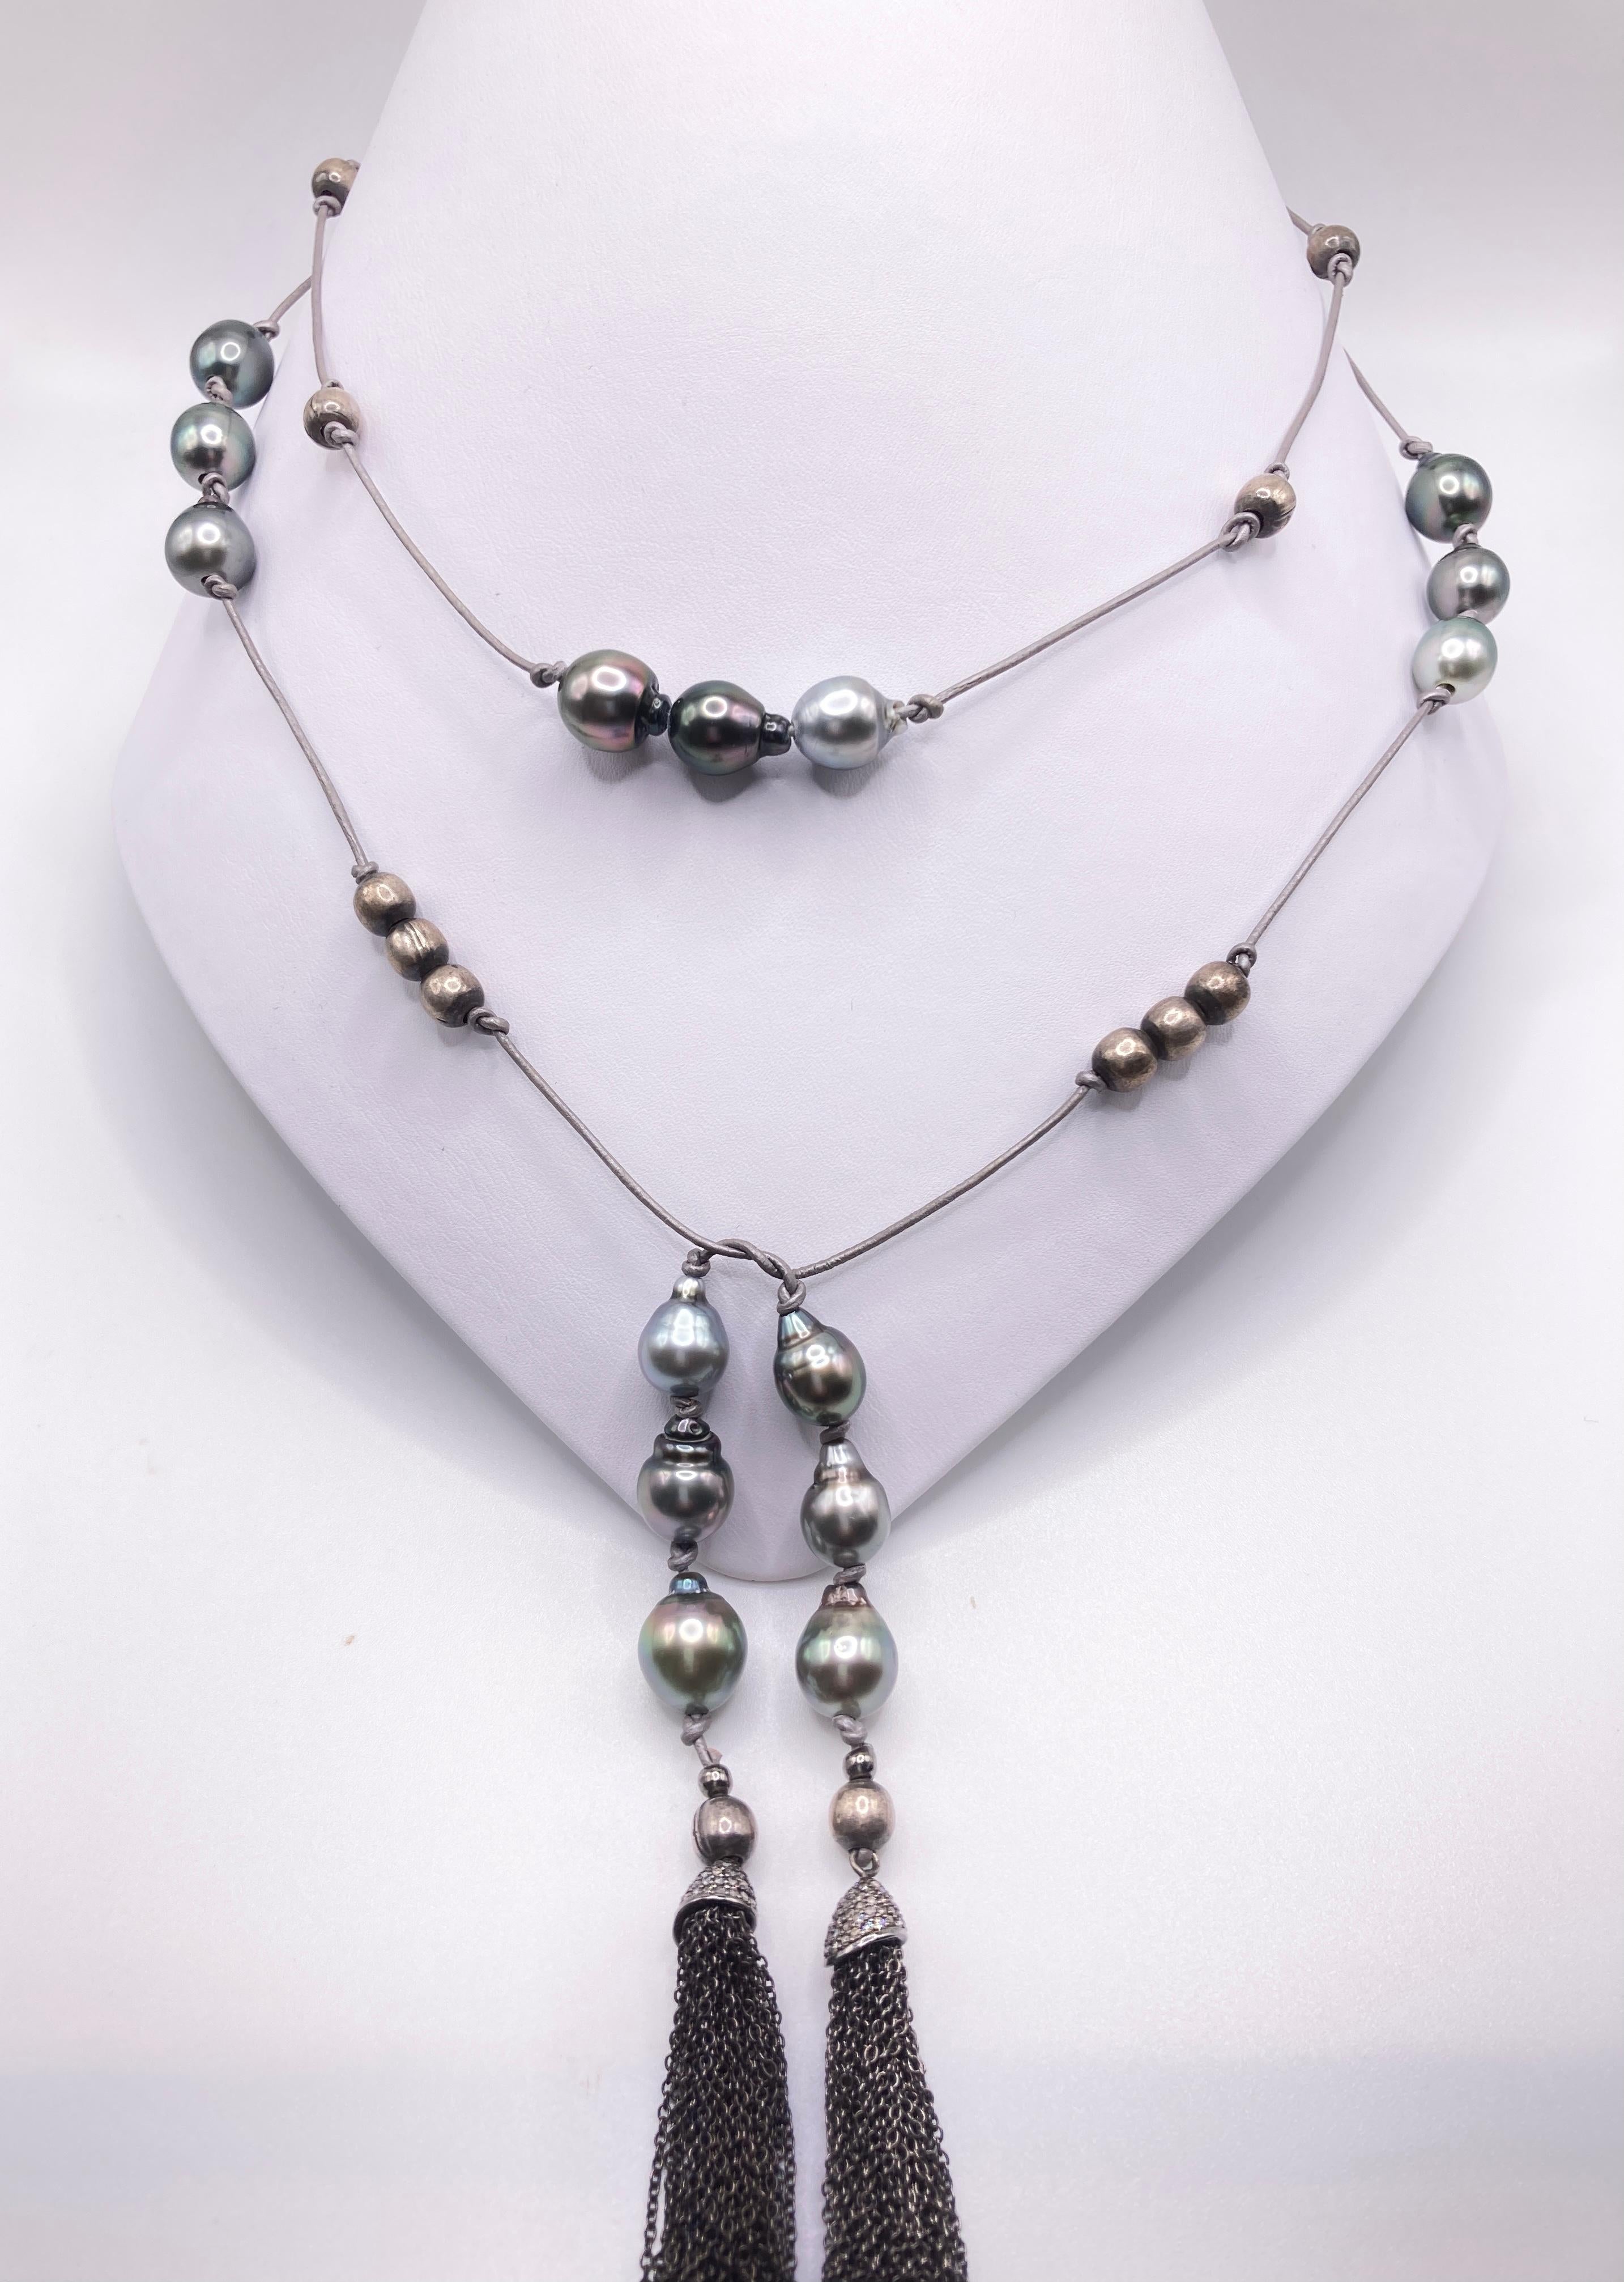 15 genuine Tahitian Pearls and silver beads are precisely mounted on leather to have three pearls in the front of the neck where the second layer that you tie below have also three pearls on each side and two diamond tassels to finish the piece. The